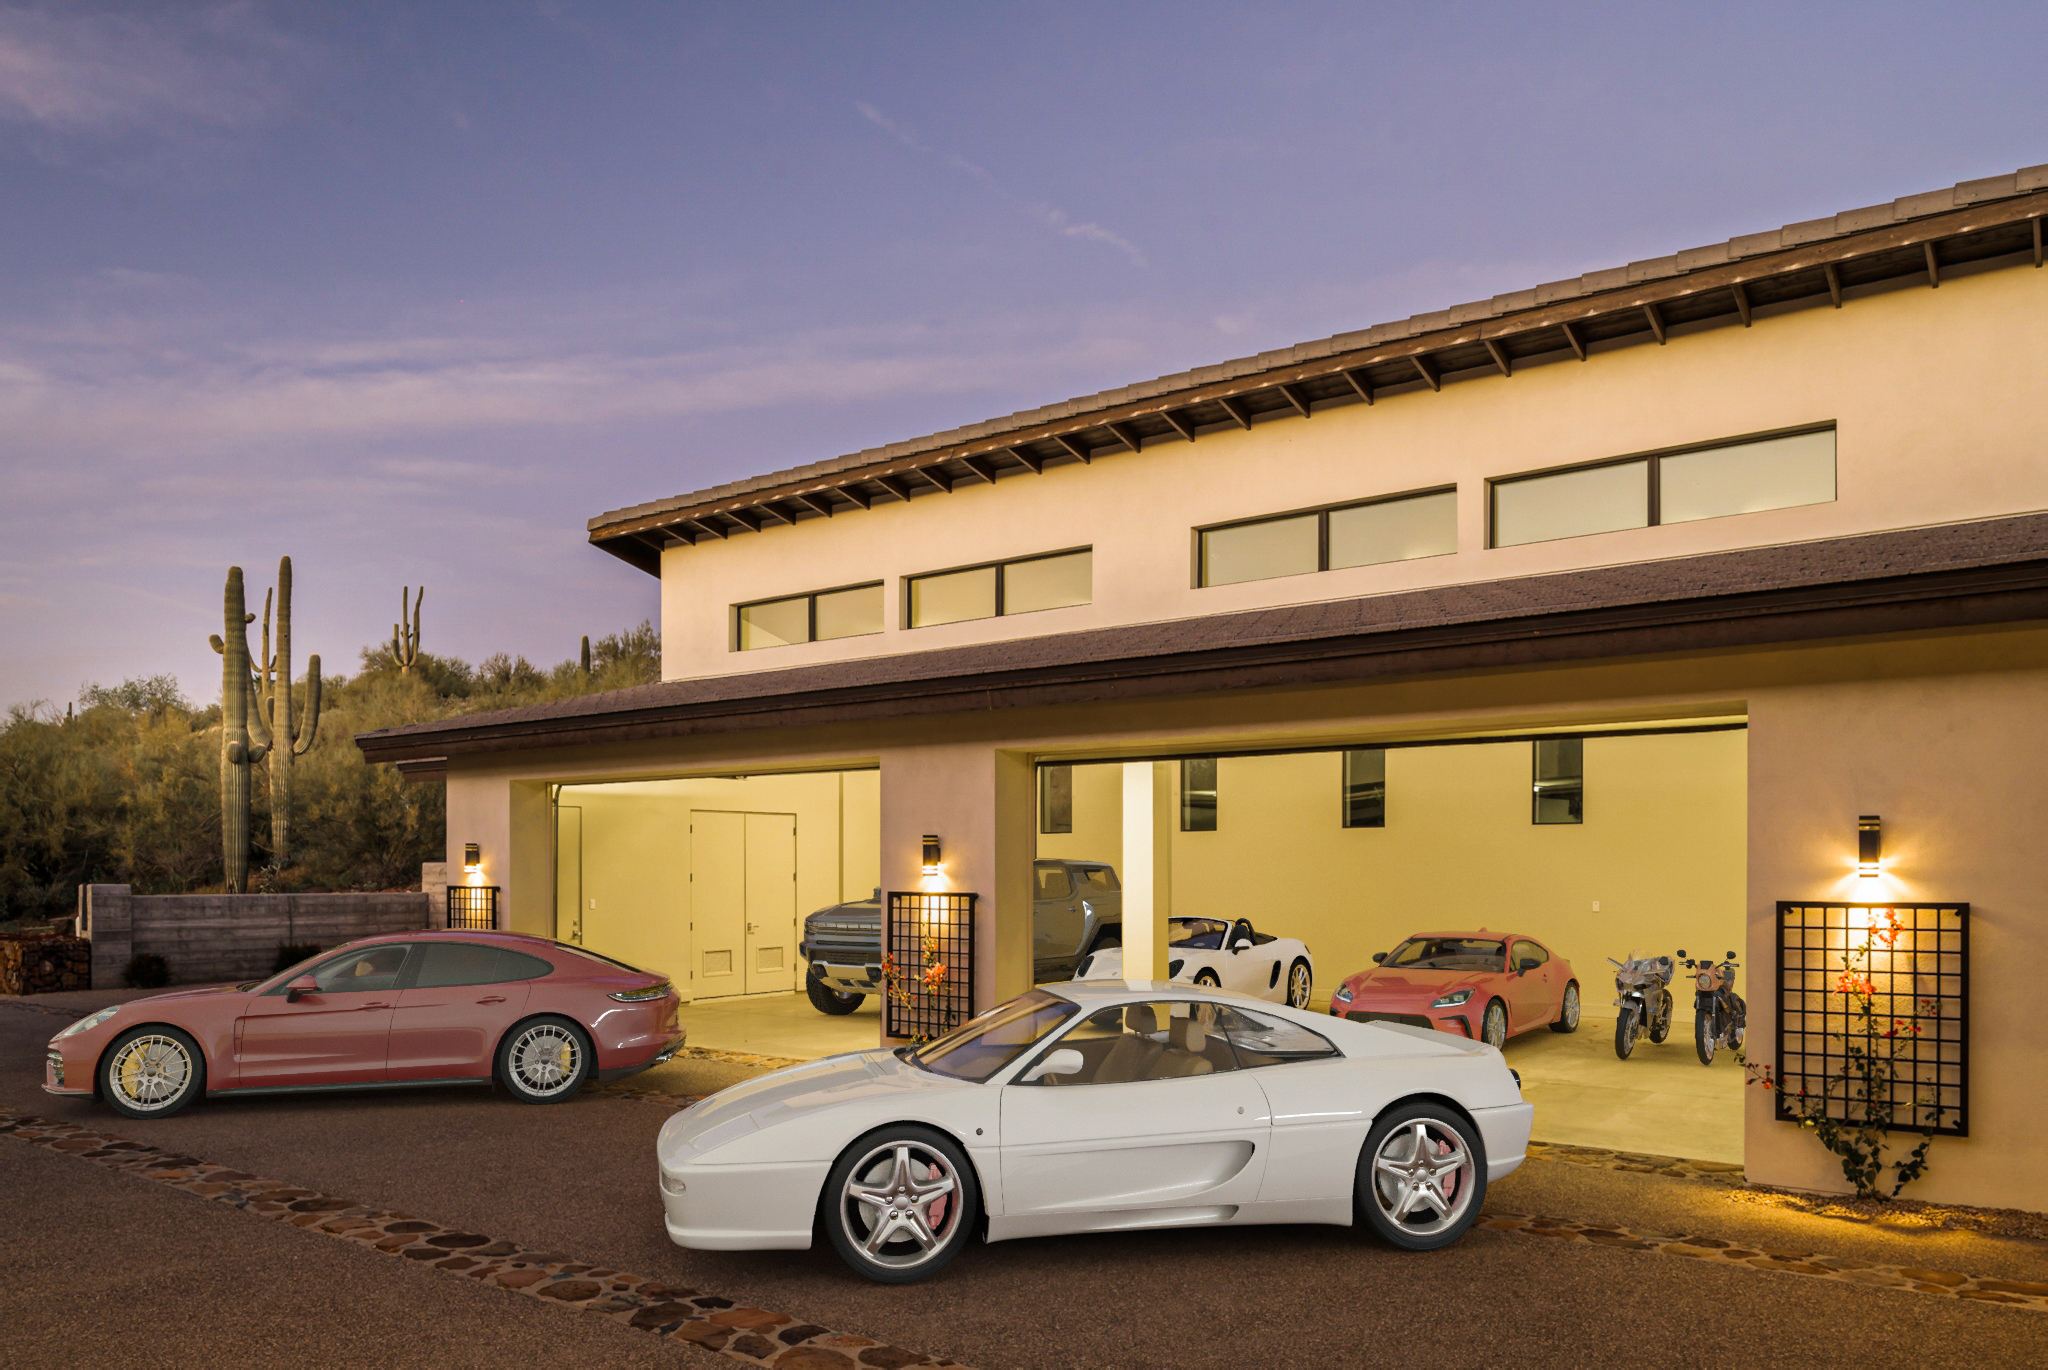 Square Foot Productions Virtual Staging, After image of a virtually staged garage with multiple vehicles